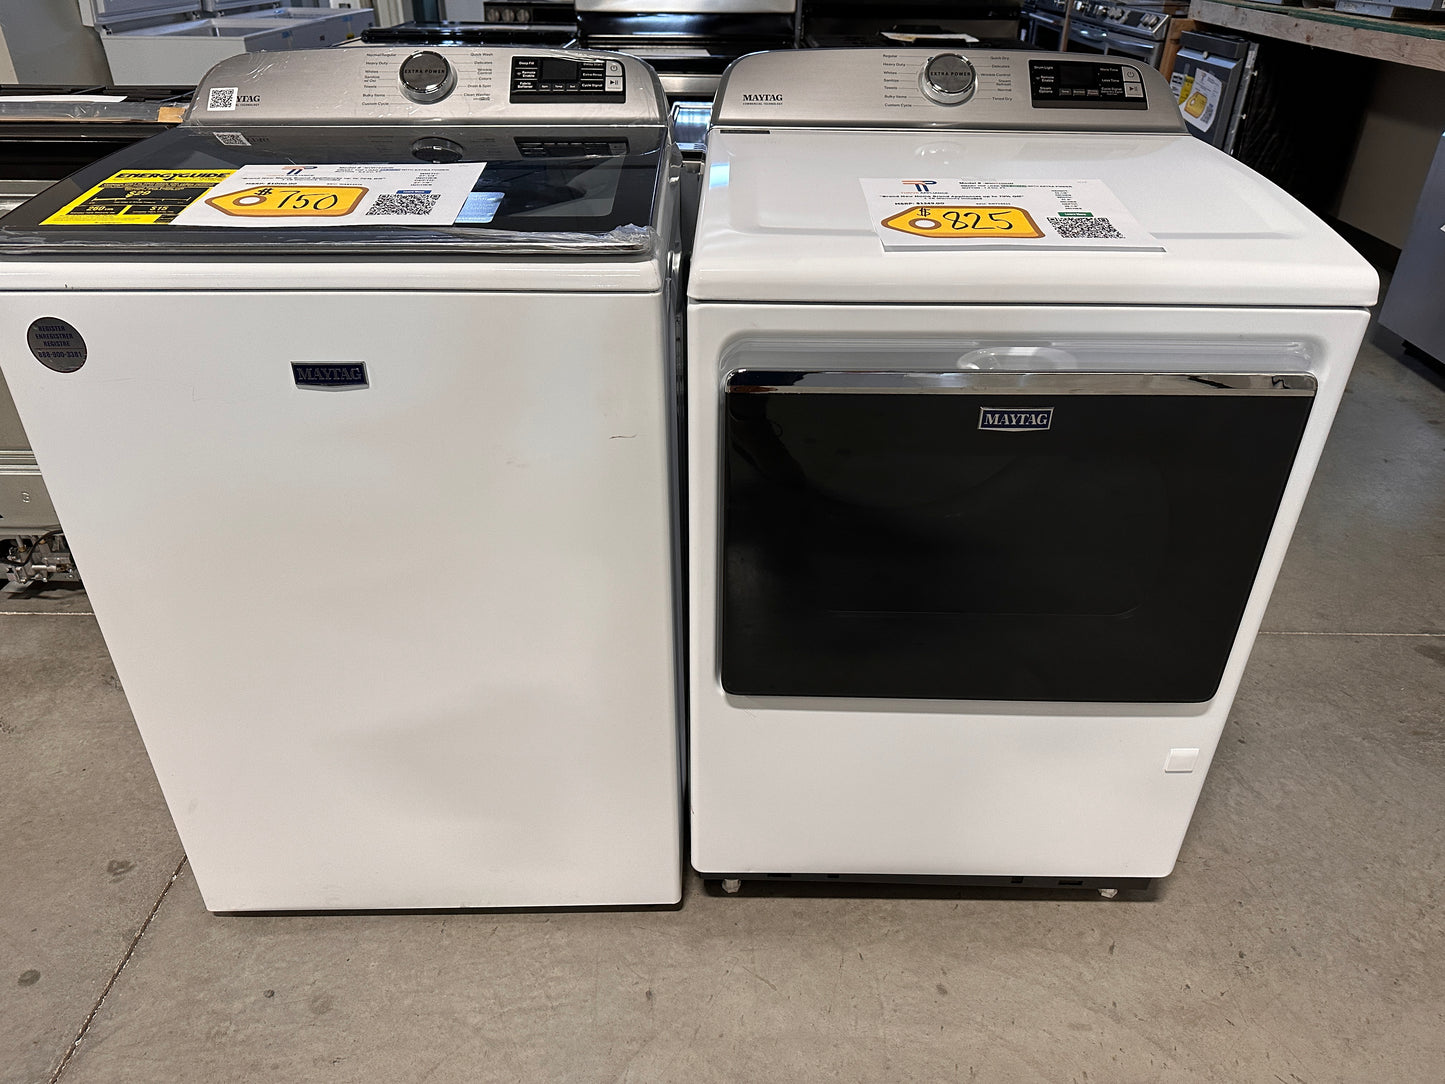 GREAT NEW MAYTAG TOP LOAD WASHER ELECTRIC DRYER SET - WAS12978 DRY12311